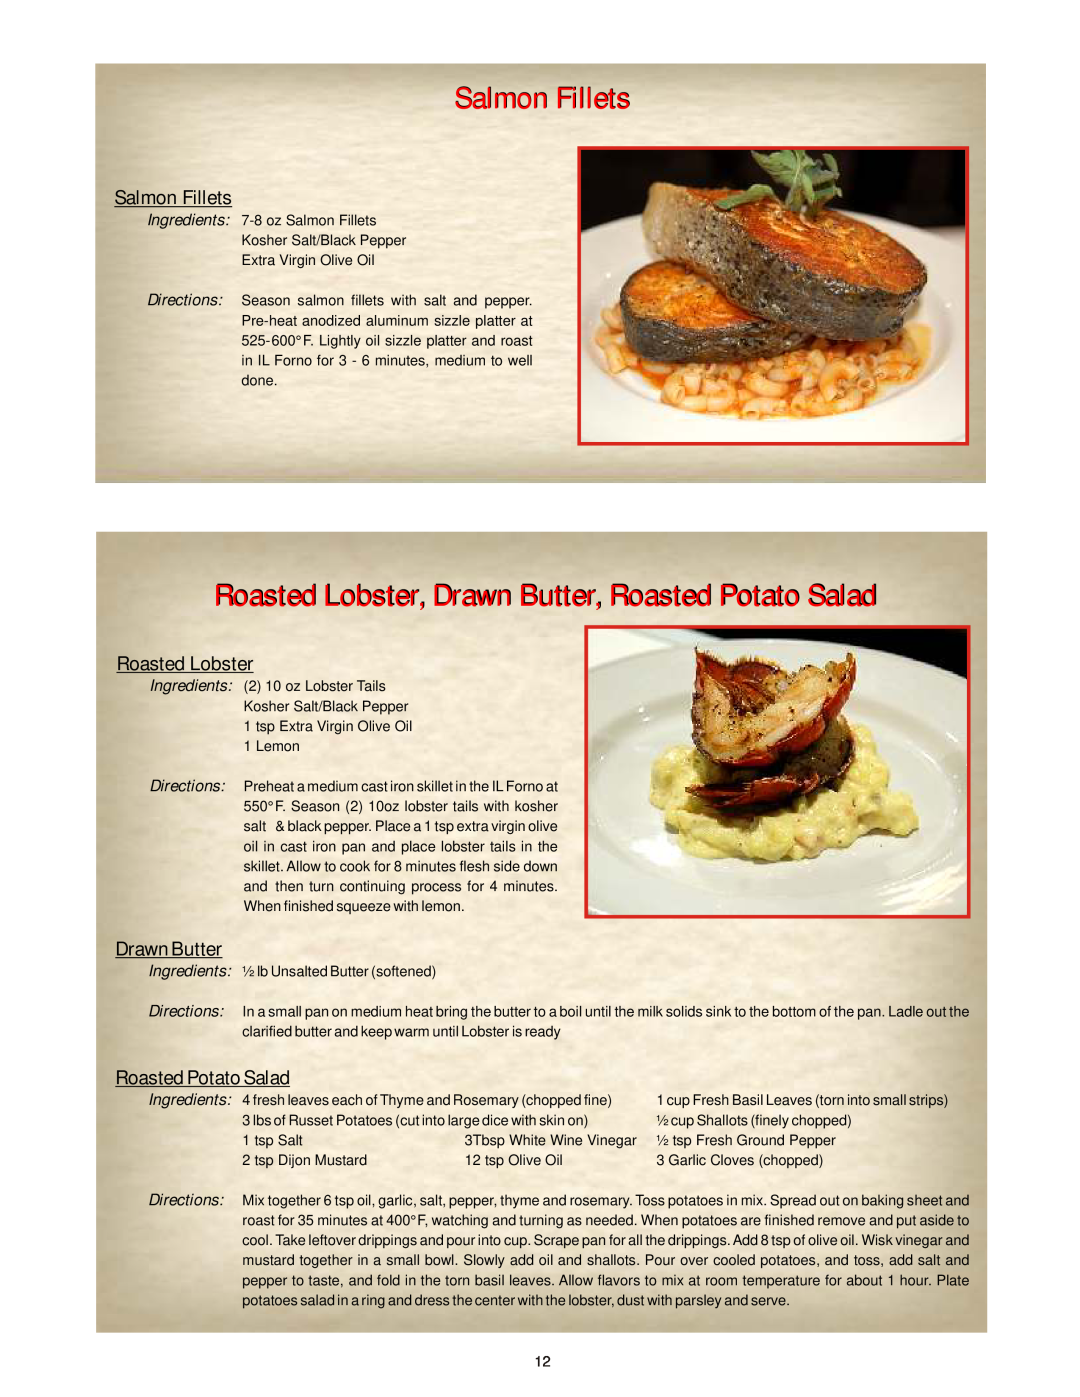 Bakers Pride Oven Classic Oven manual Salmon Fillets, Roasted Lobster, Drawn Butter, Roasted Potato Salad 